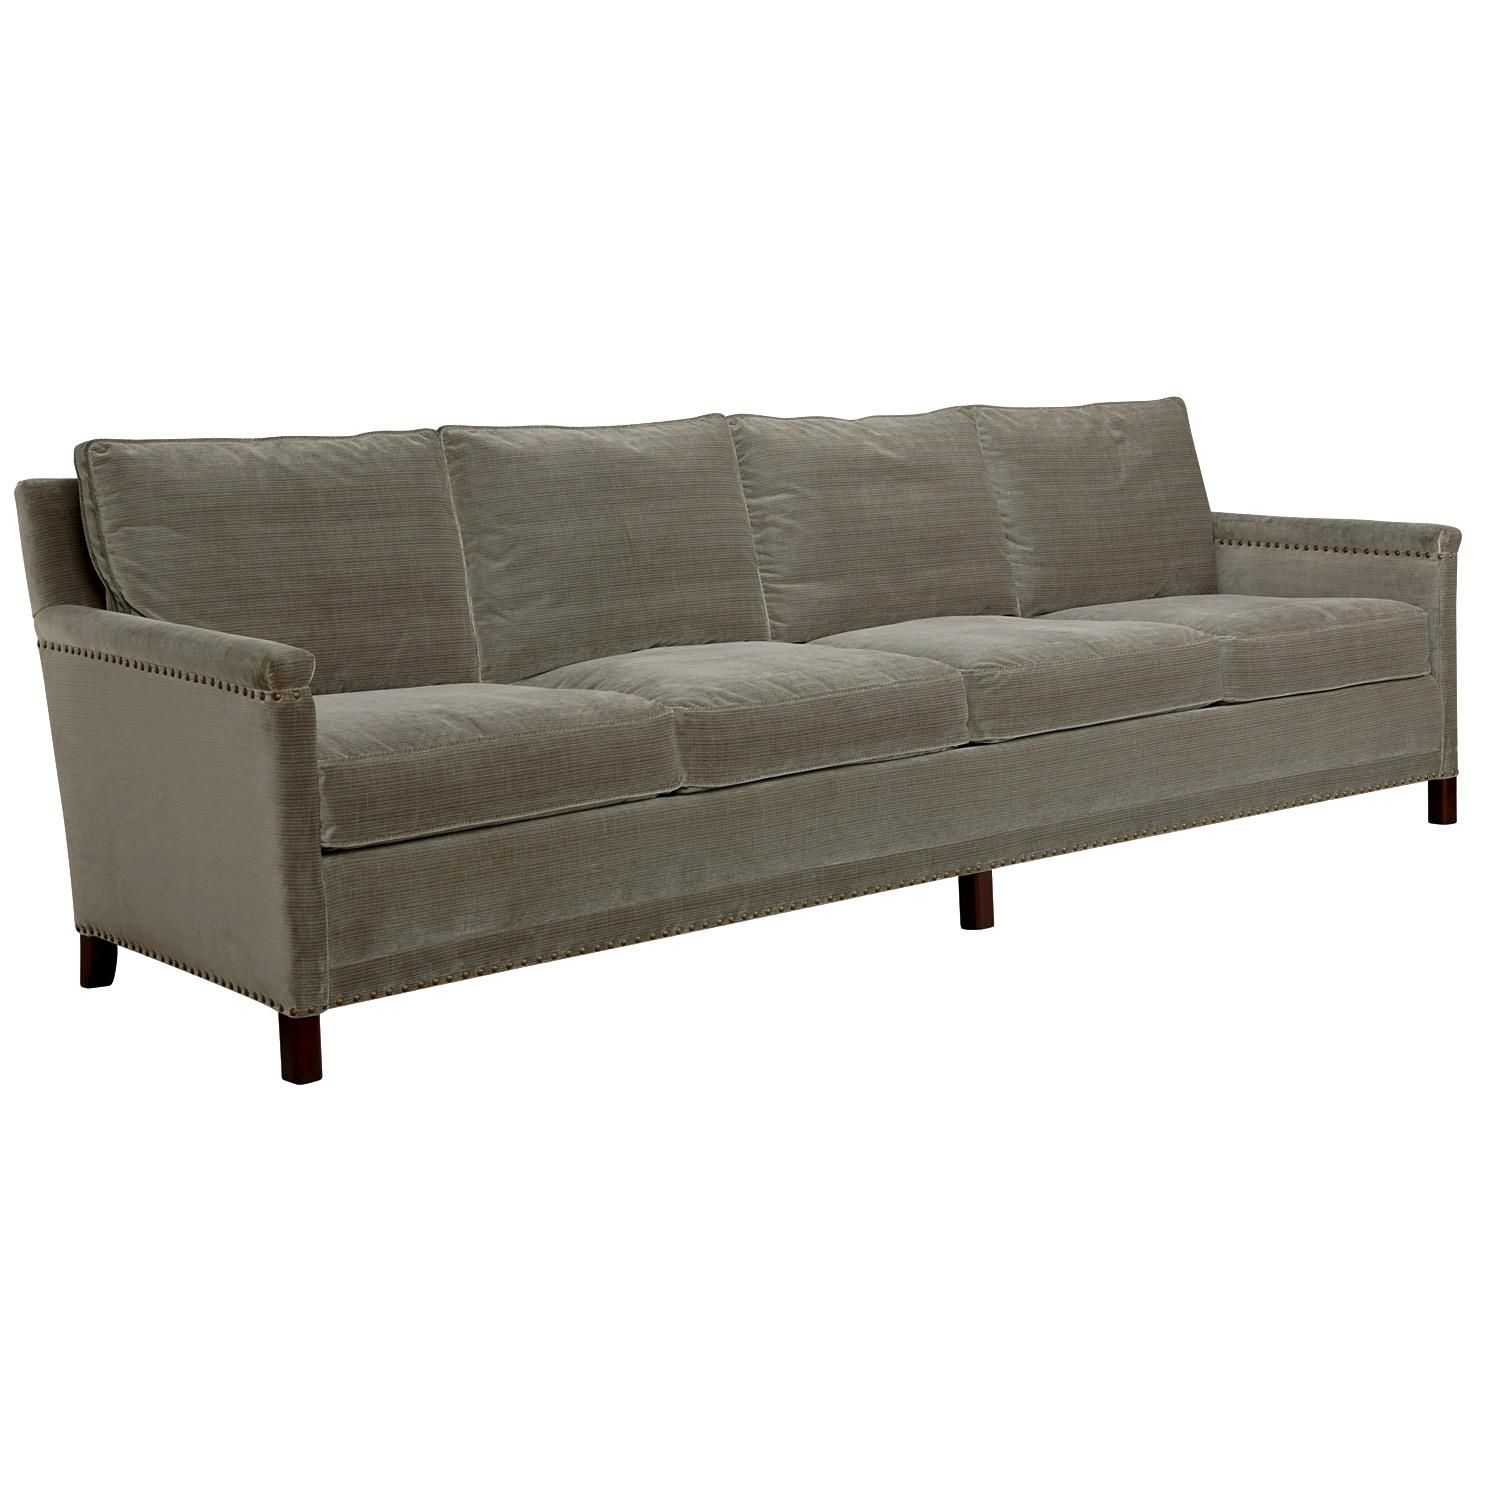 28+ [ How Long Is A Couch ] | Long Sofas Couches Smalltowndjs Com Regarding Long Modern Sofas (View 19 of 20)